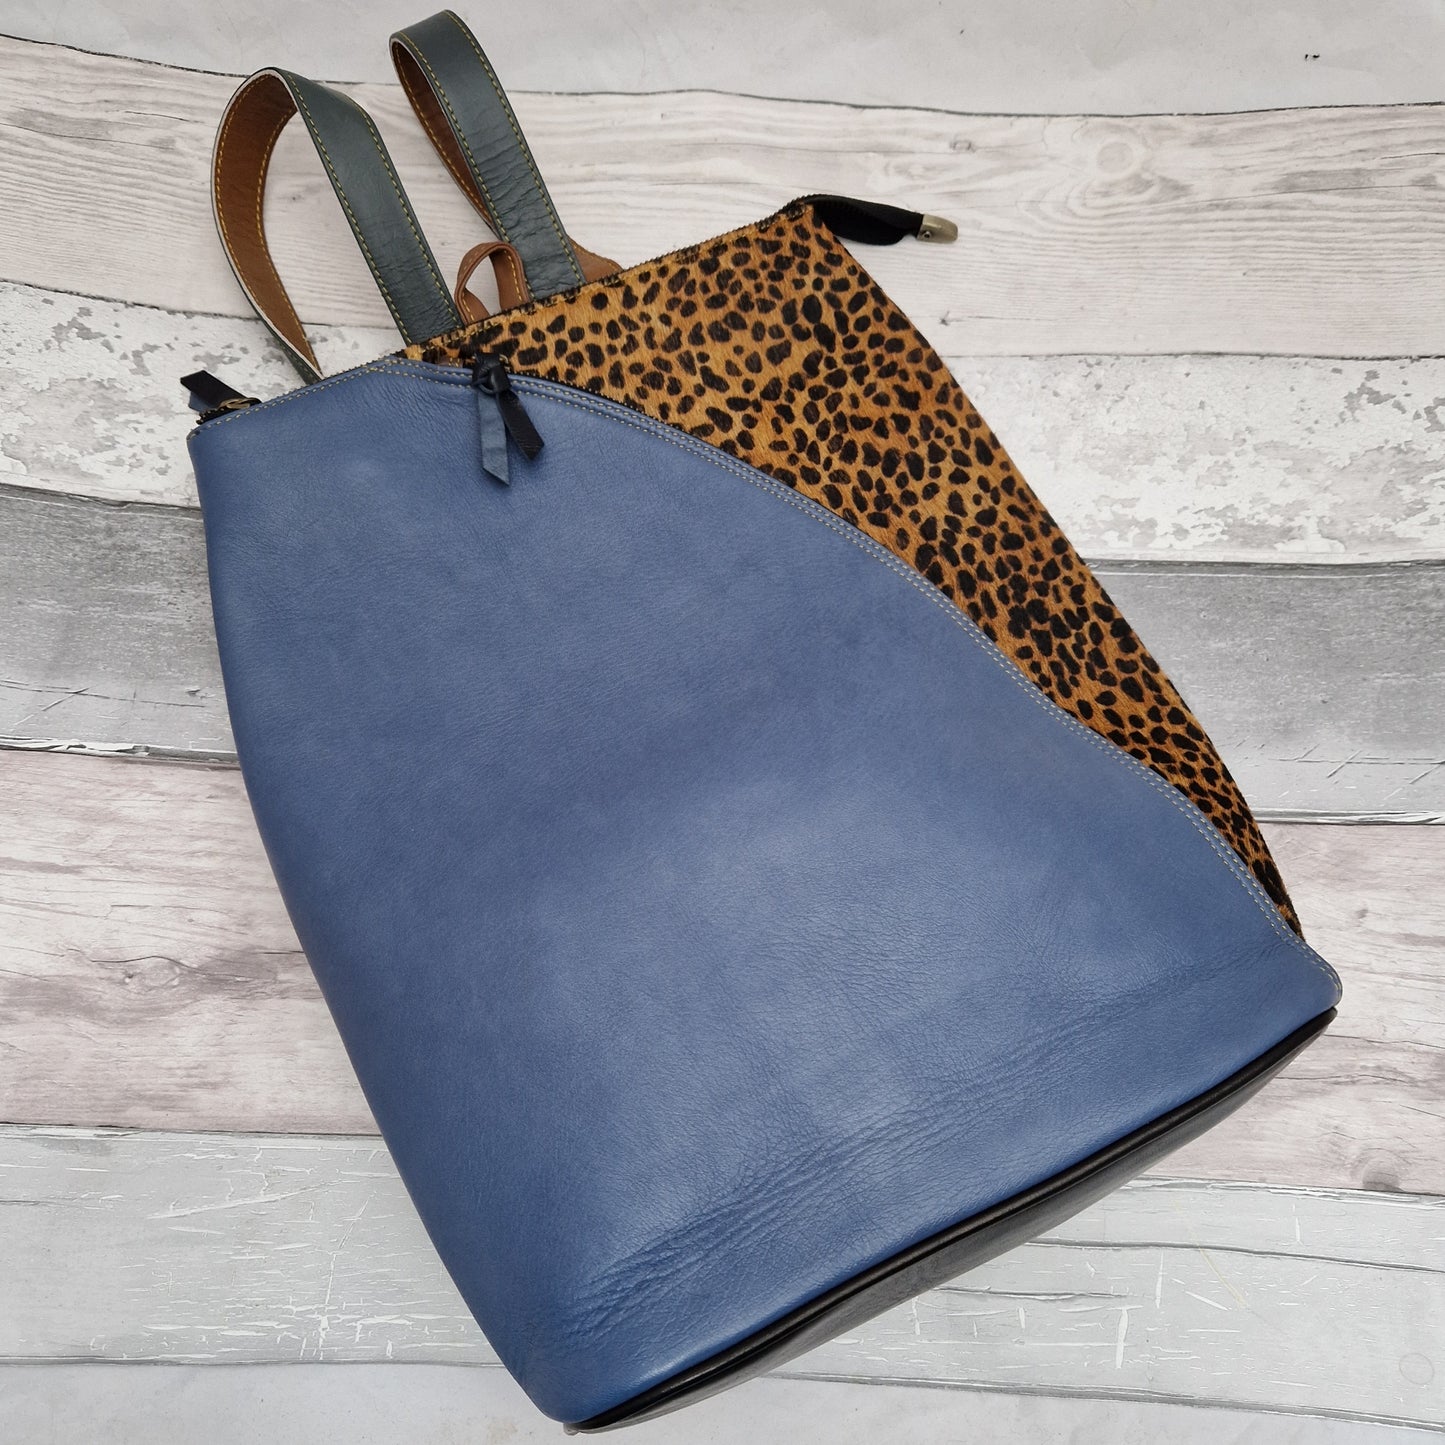 Stone blue coloured leather back pack with a textured panel featuring a Cheetah Print.